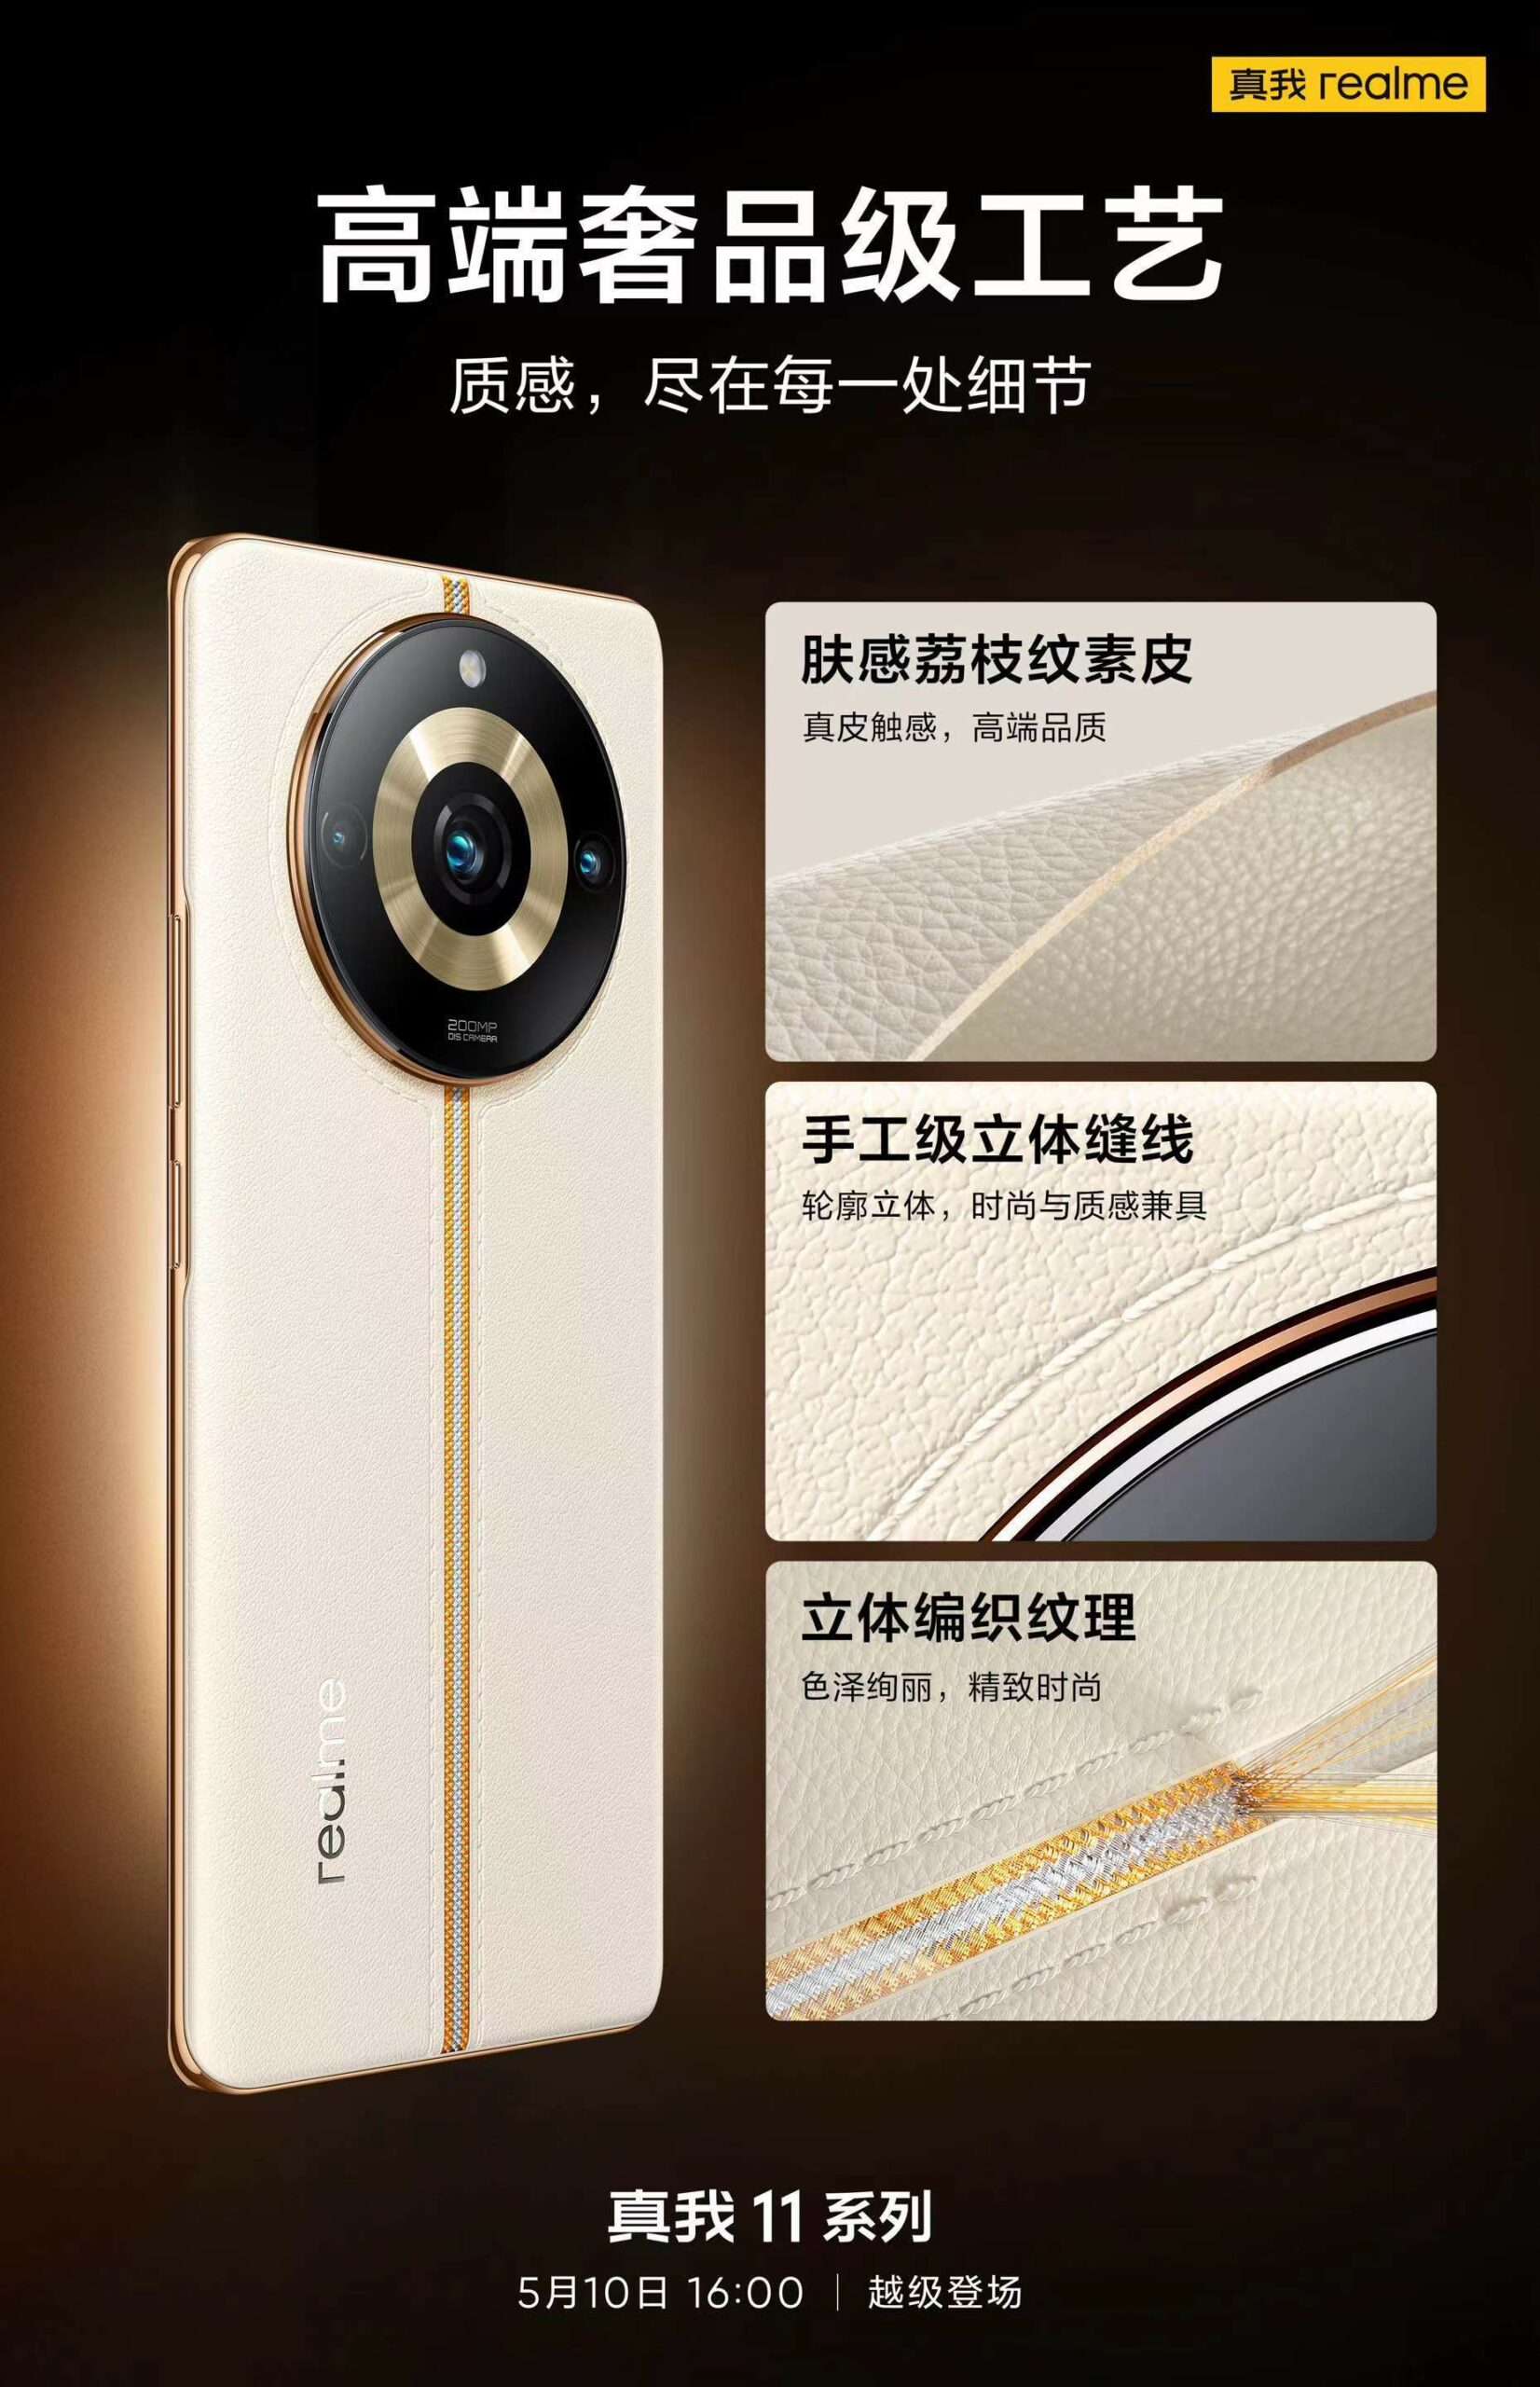 realme-11-pro-series-exquisite-design-revealed-ahead-of-may-10th-launch-3015633